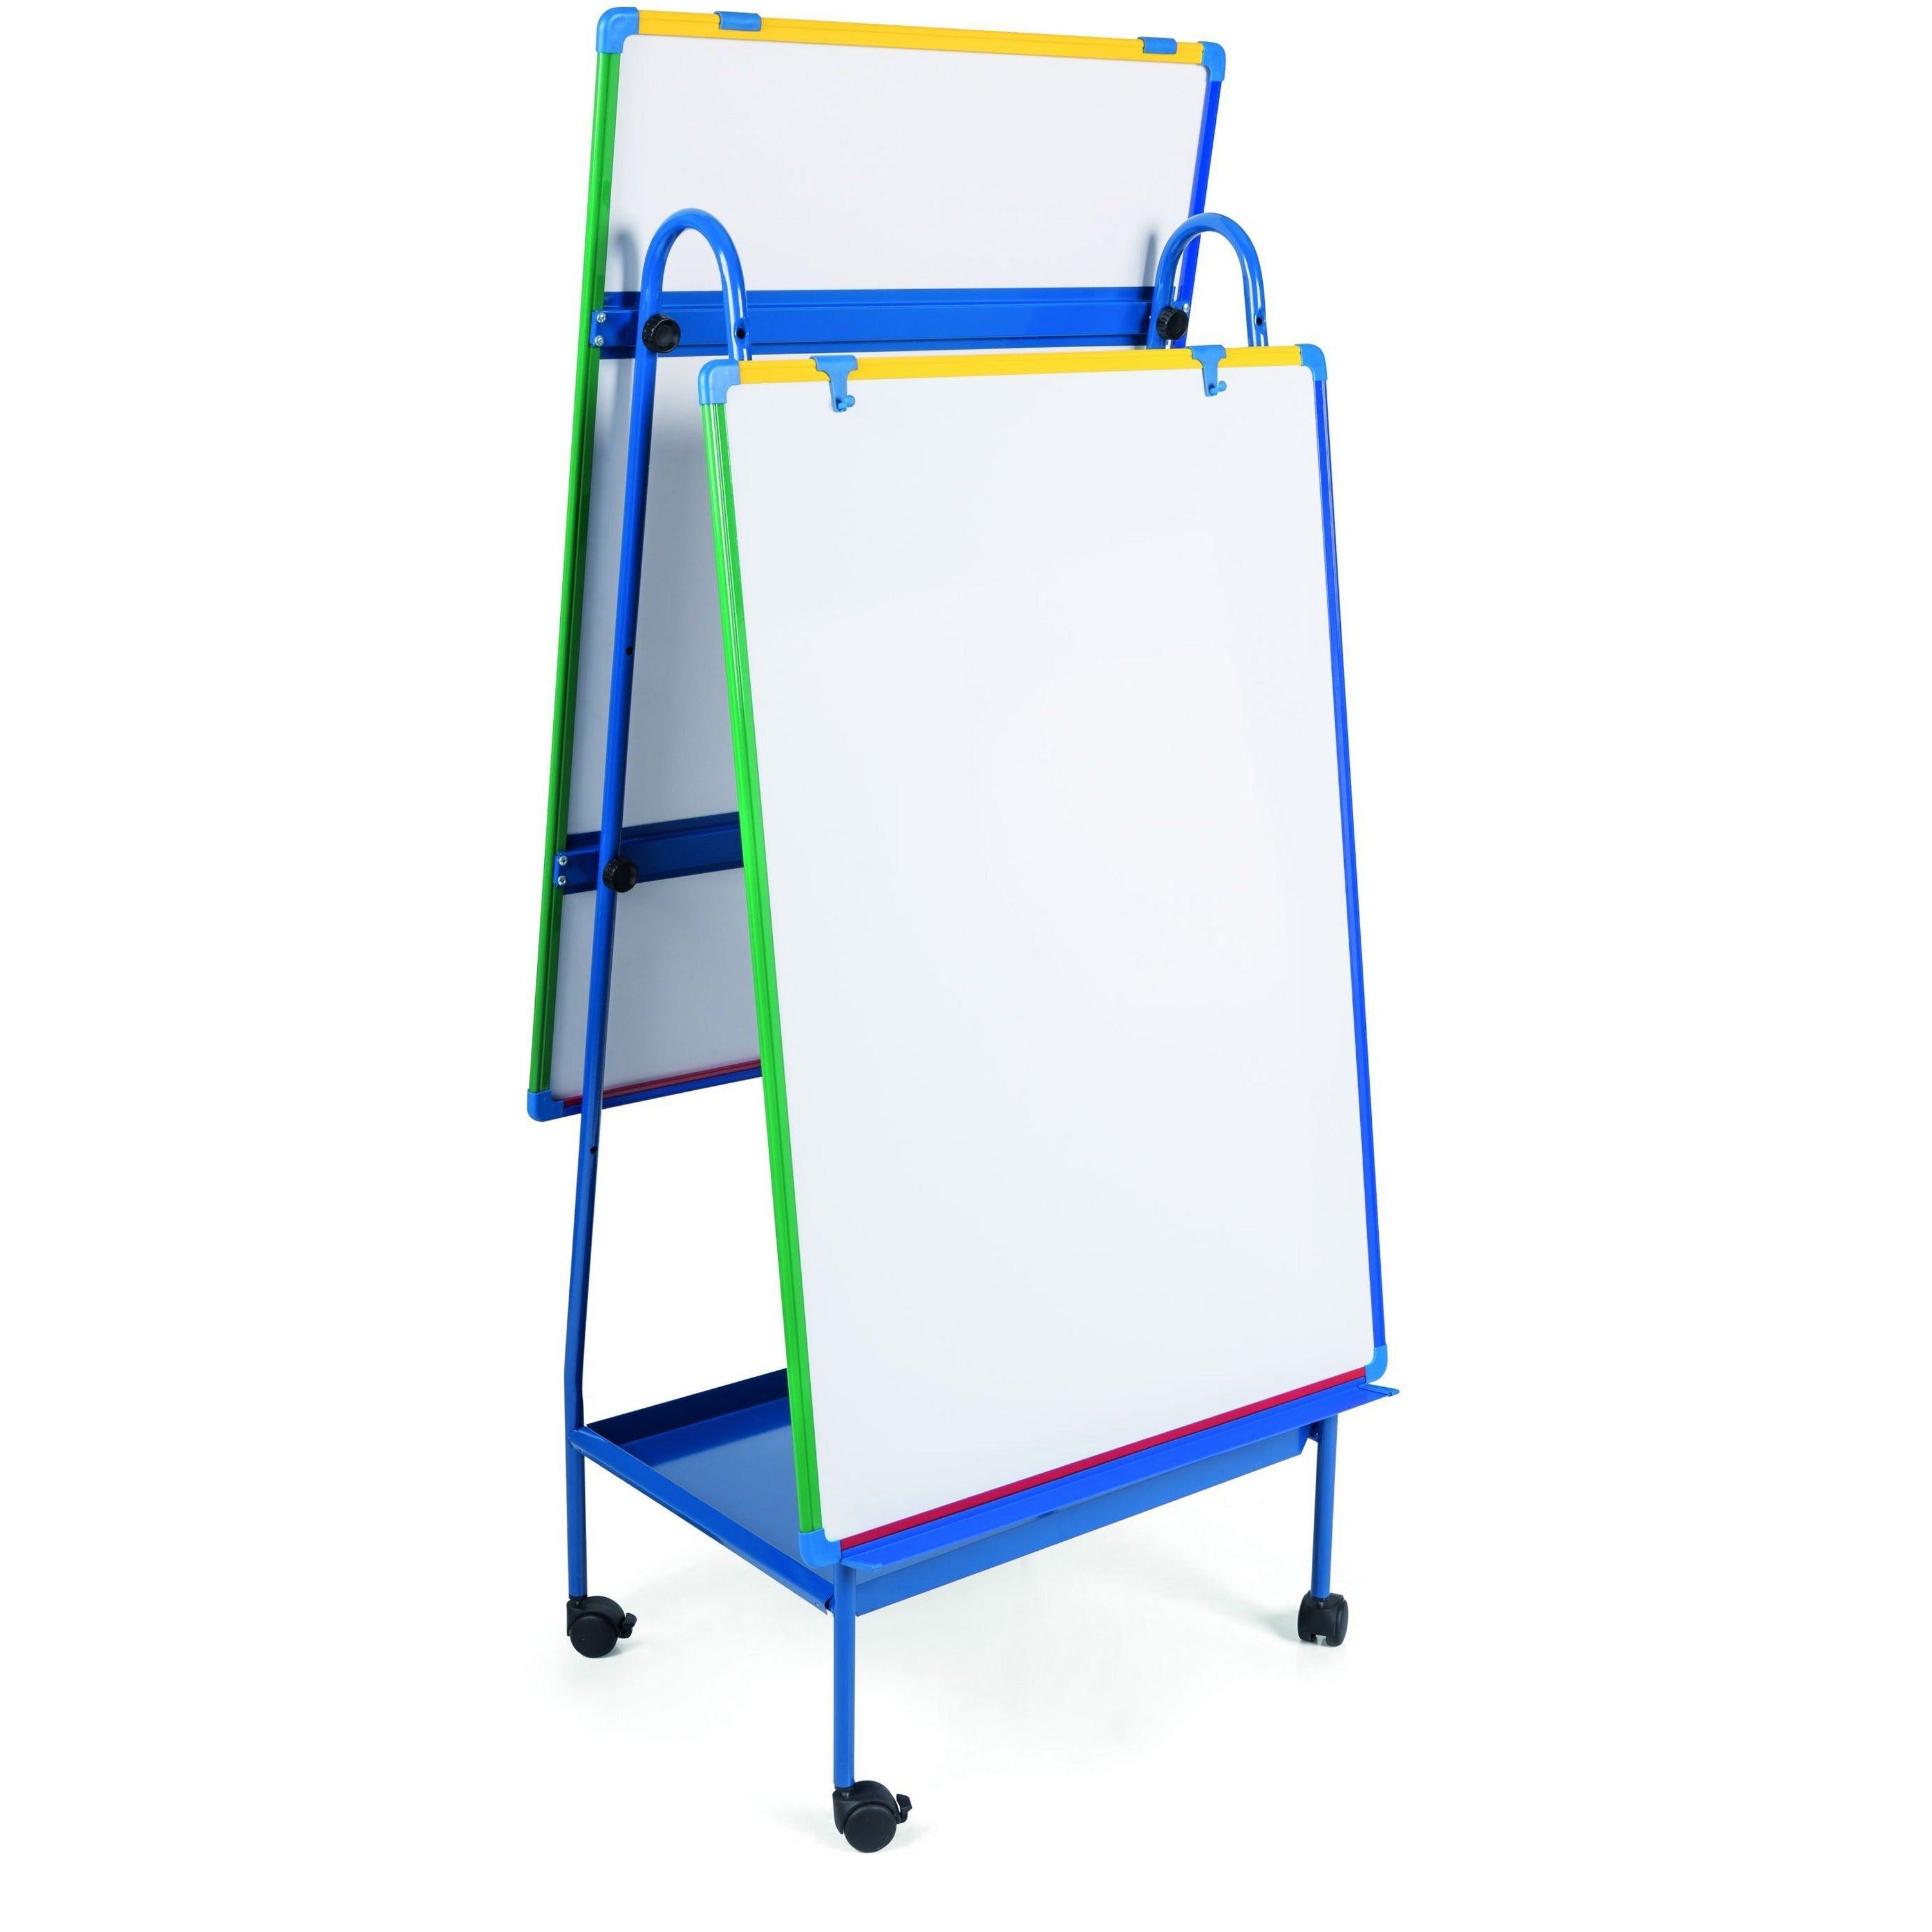 bi-office-magnetic-adjustabledoublee-sided-easel-white-surface-rectangle-magnetic-assembly-required-1-each_bvcea49145026 - 4